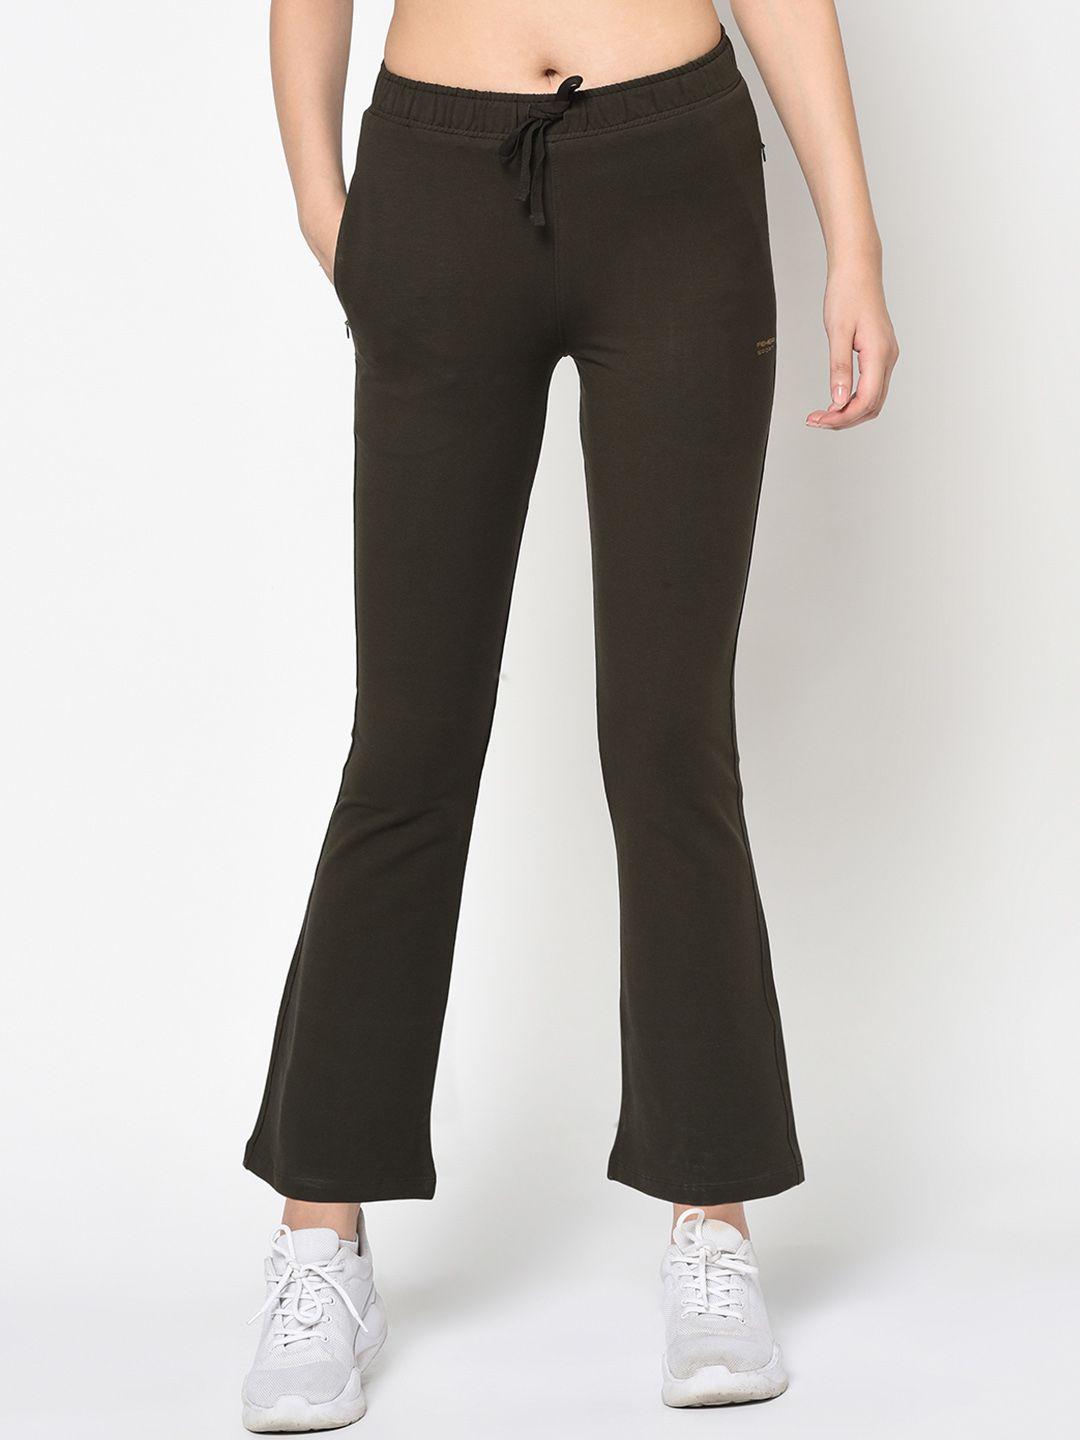 femea-women-olive-brown-solid-bootcut-track-pants